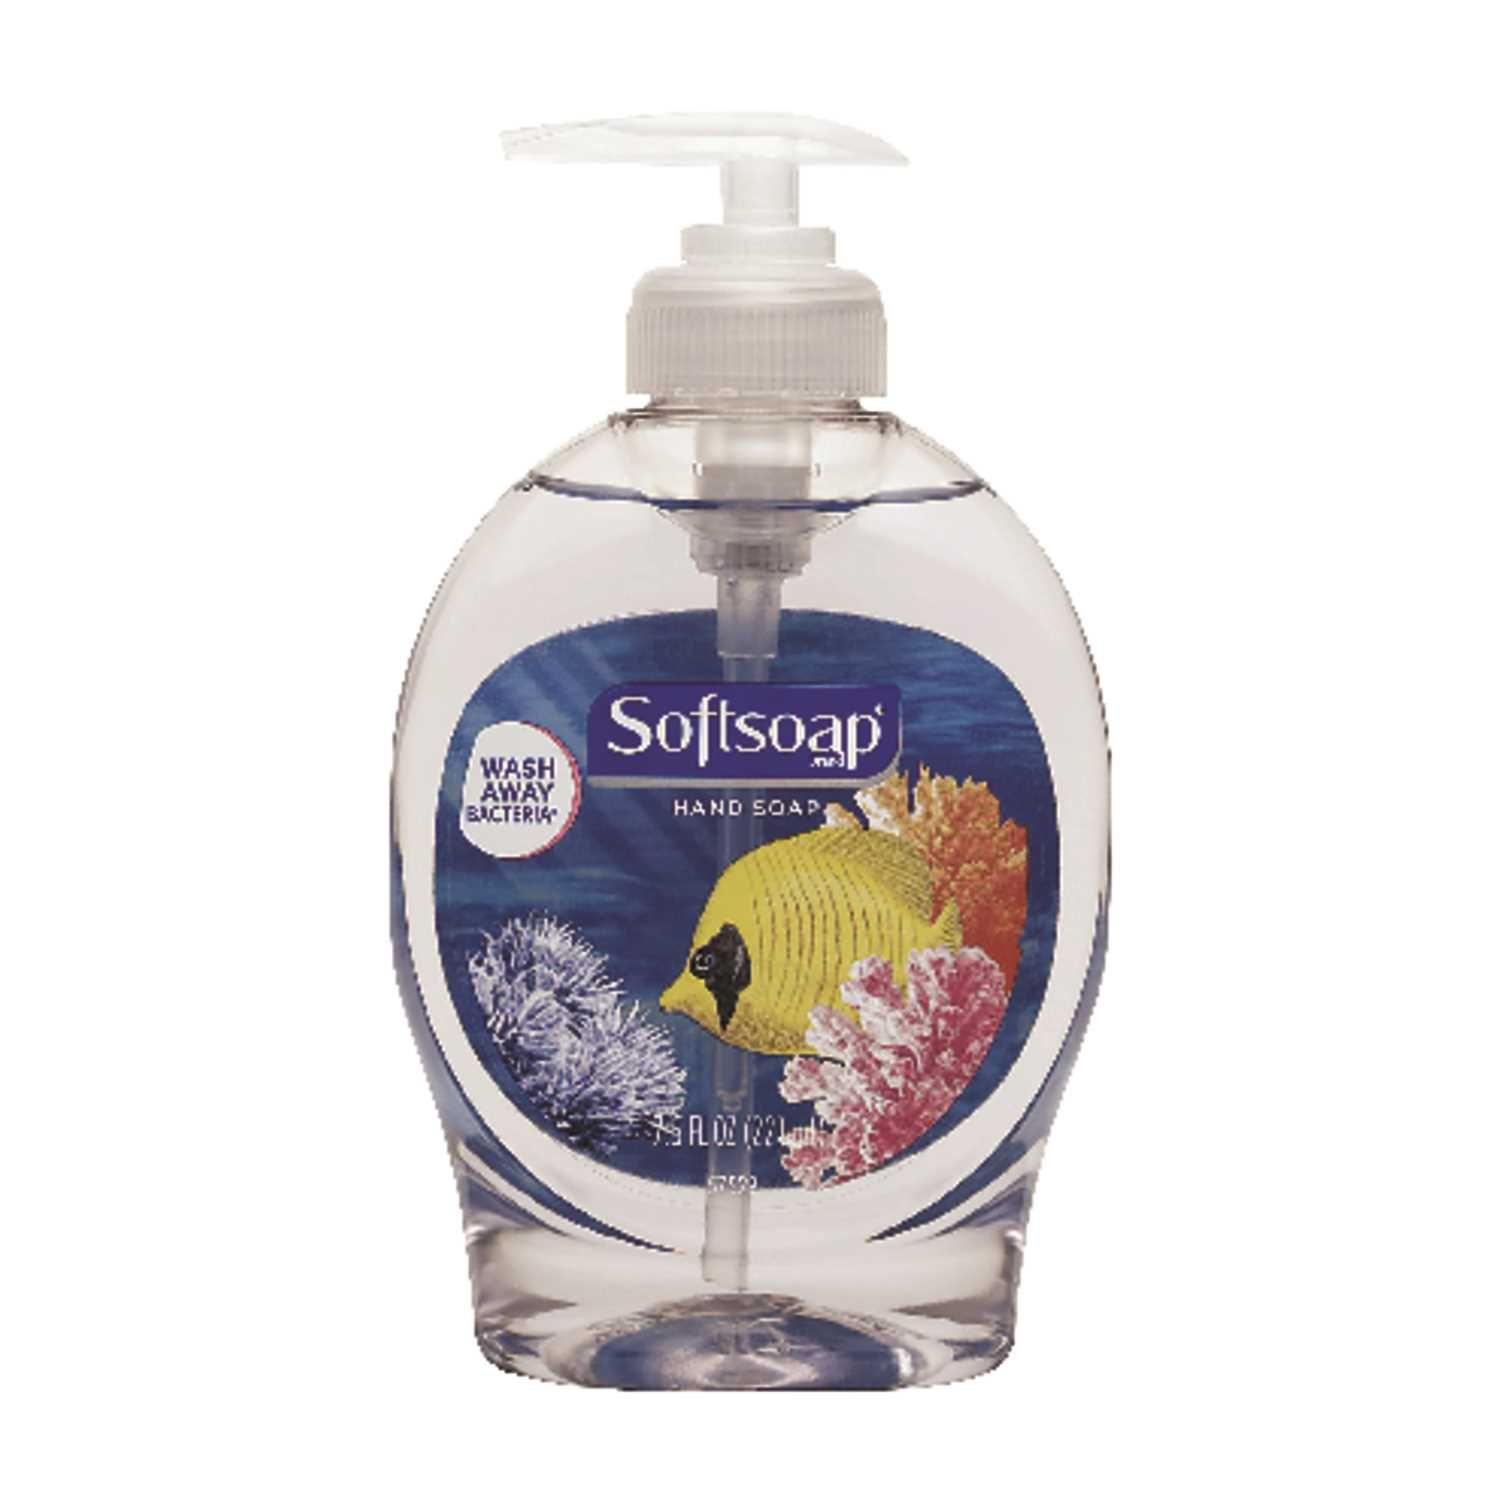 Softsoap Logo - Softsoap Unscented Scent Antibacterial Liquid Hand Soap - Ace Hardware